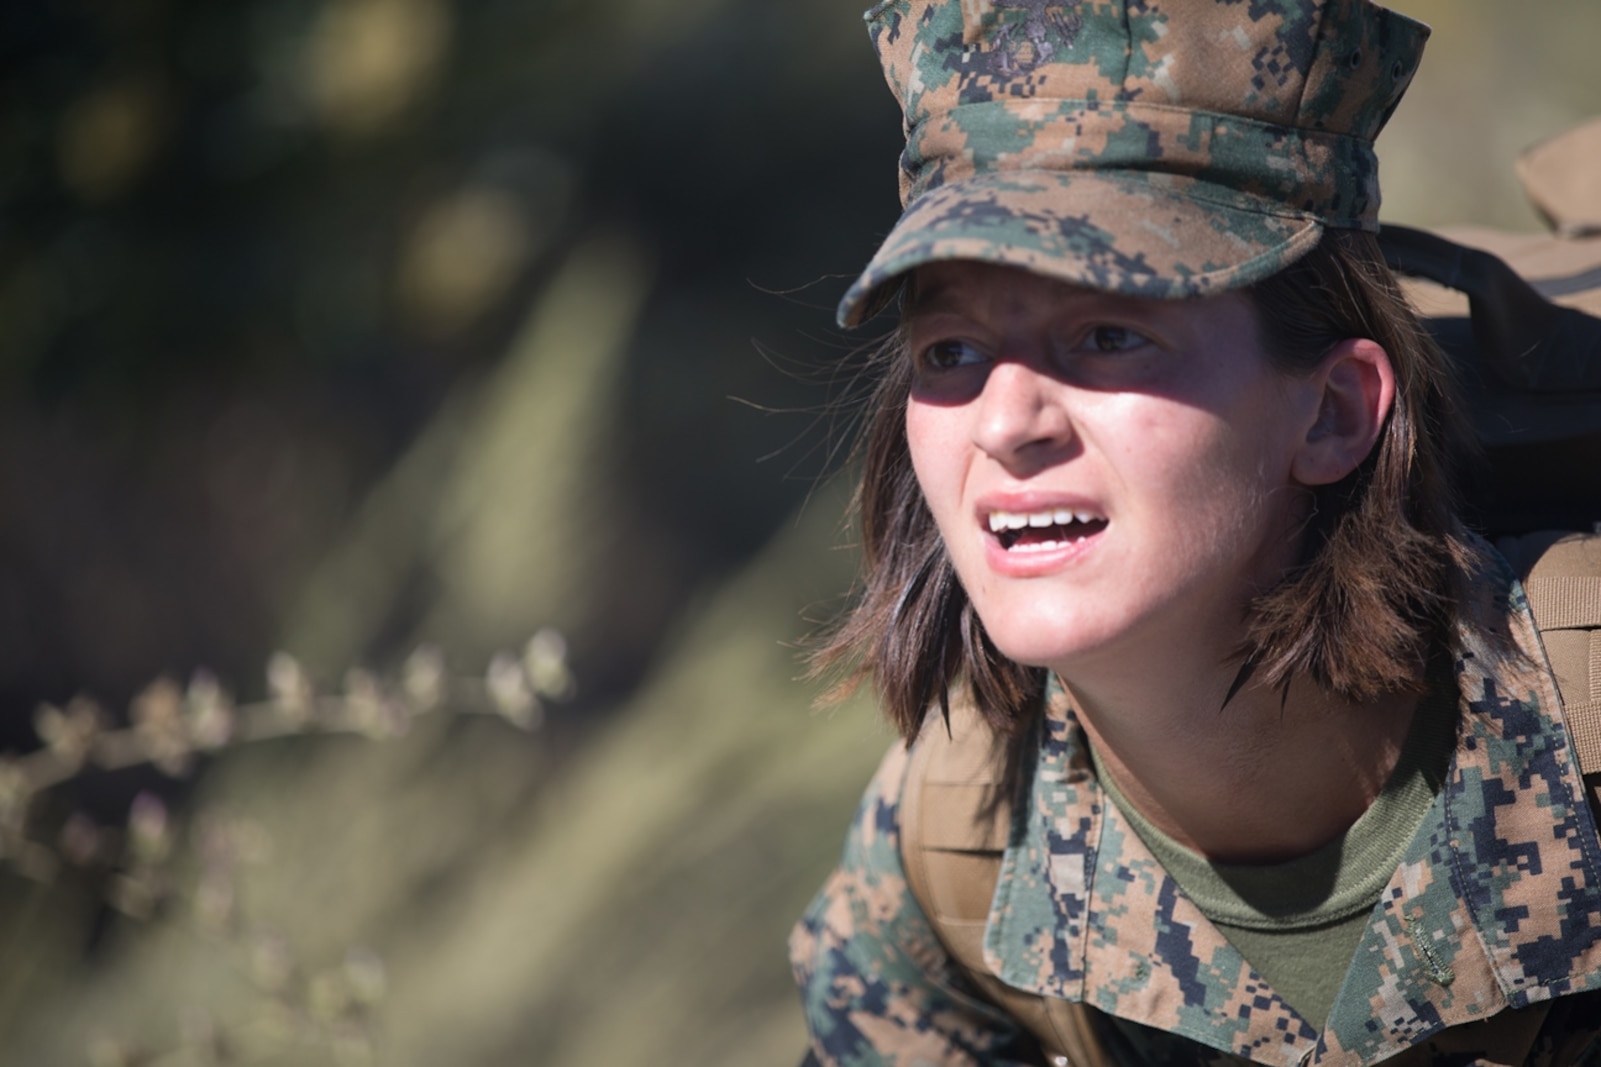 U.S. Marine Pfc. Catherine Mason, an electrician with Combat Logistics Battalion 5, Headquarters Regiment, 1st Marine Logistics Group, participates in a conditioning hike on Camp Pendleton, Calif., June 27, 2017. The Marines have multiple conditioning hikes to prepare for Mountain Exercise 4-17 which will be conducted at the Marine Corps Mountain Warfare Training Center in Bridgeport, Calif. (U.S. Marine Corps photo by Lance Cpl. Timothy Shoemaker)